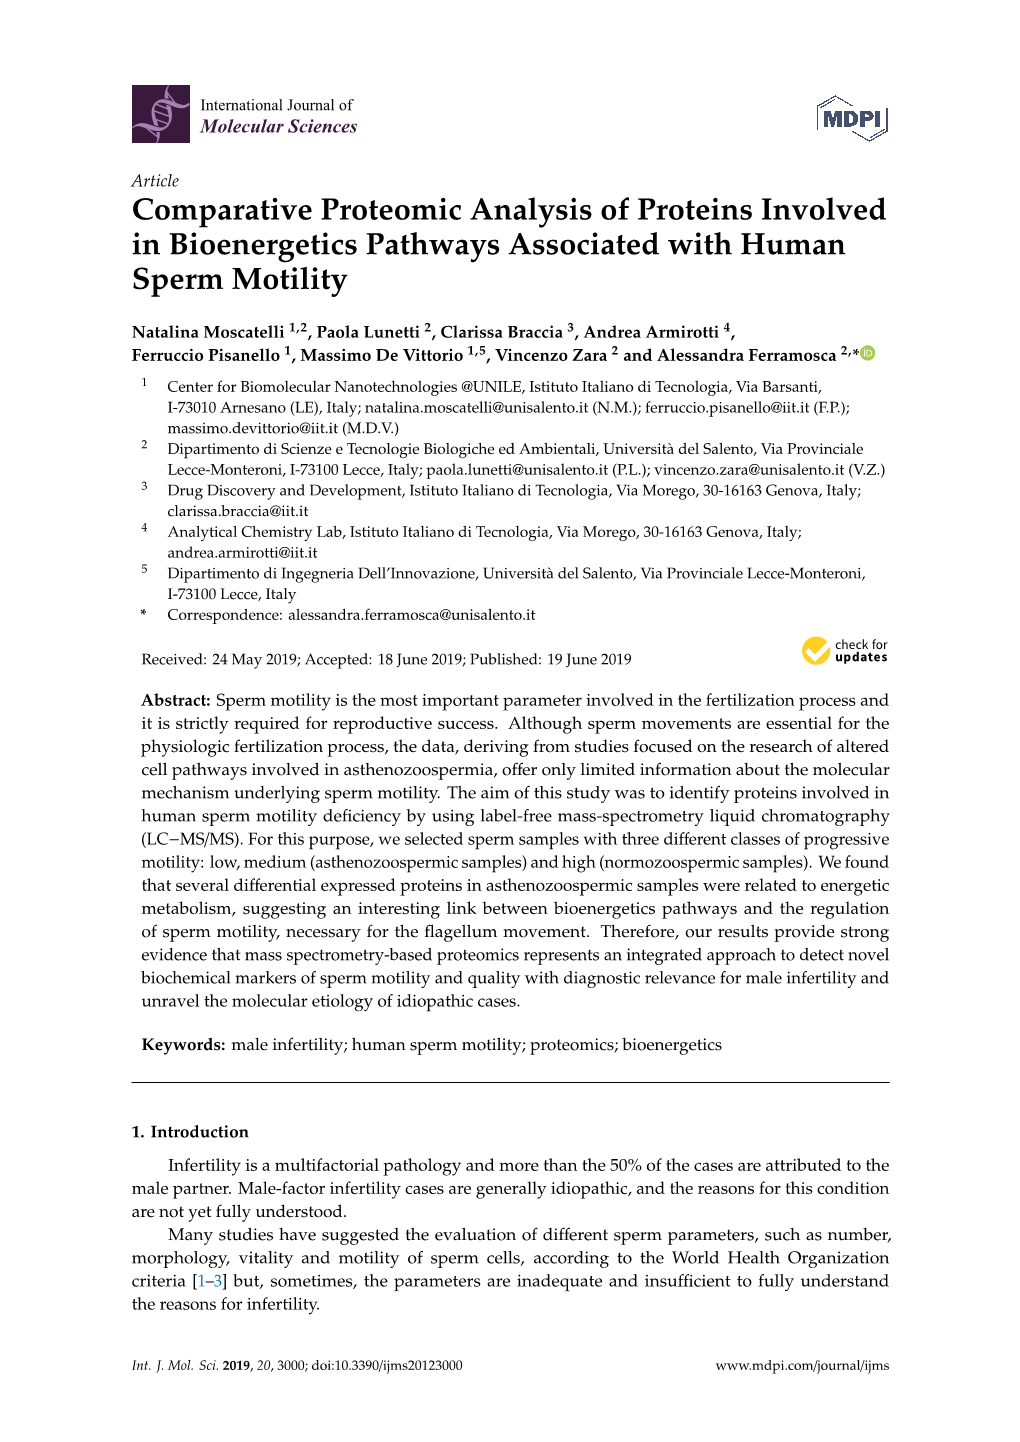 Comparative Proteomic Analysis of Proteins Involved in Bioenergetics Pathways Associated with Human Sperm Motility